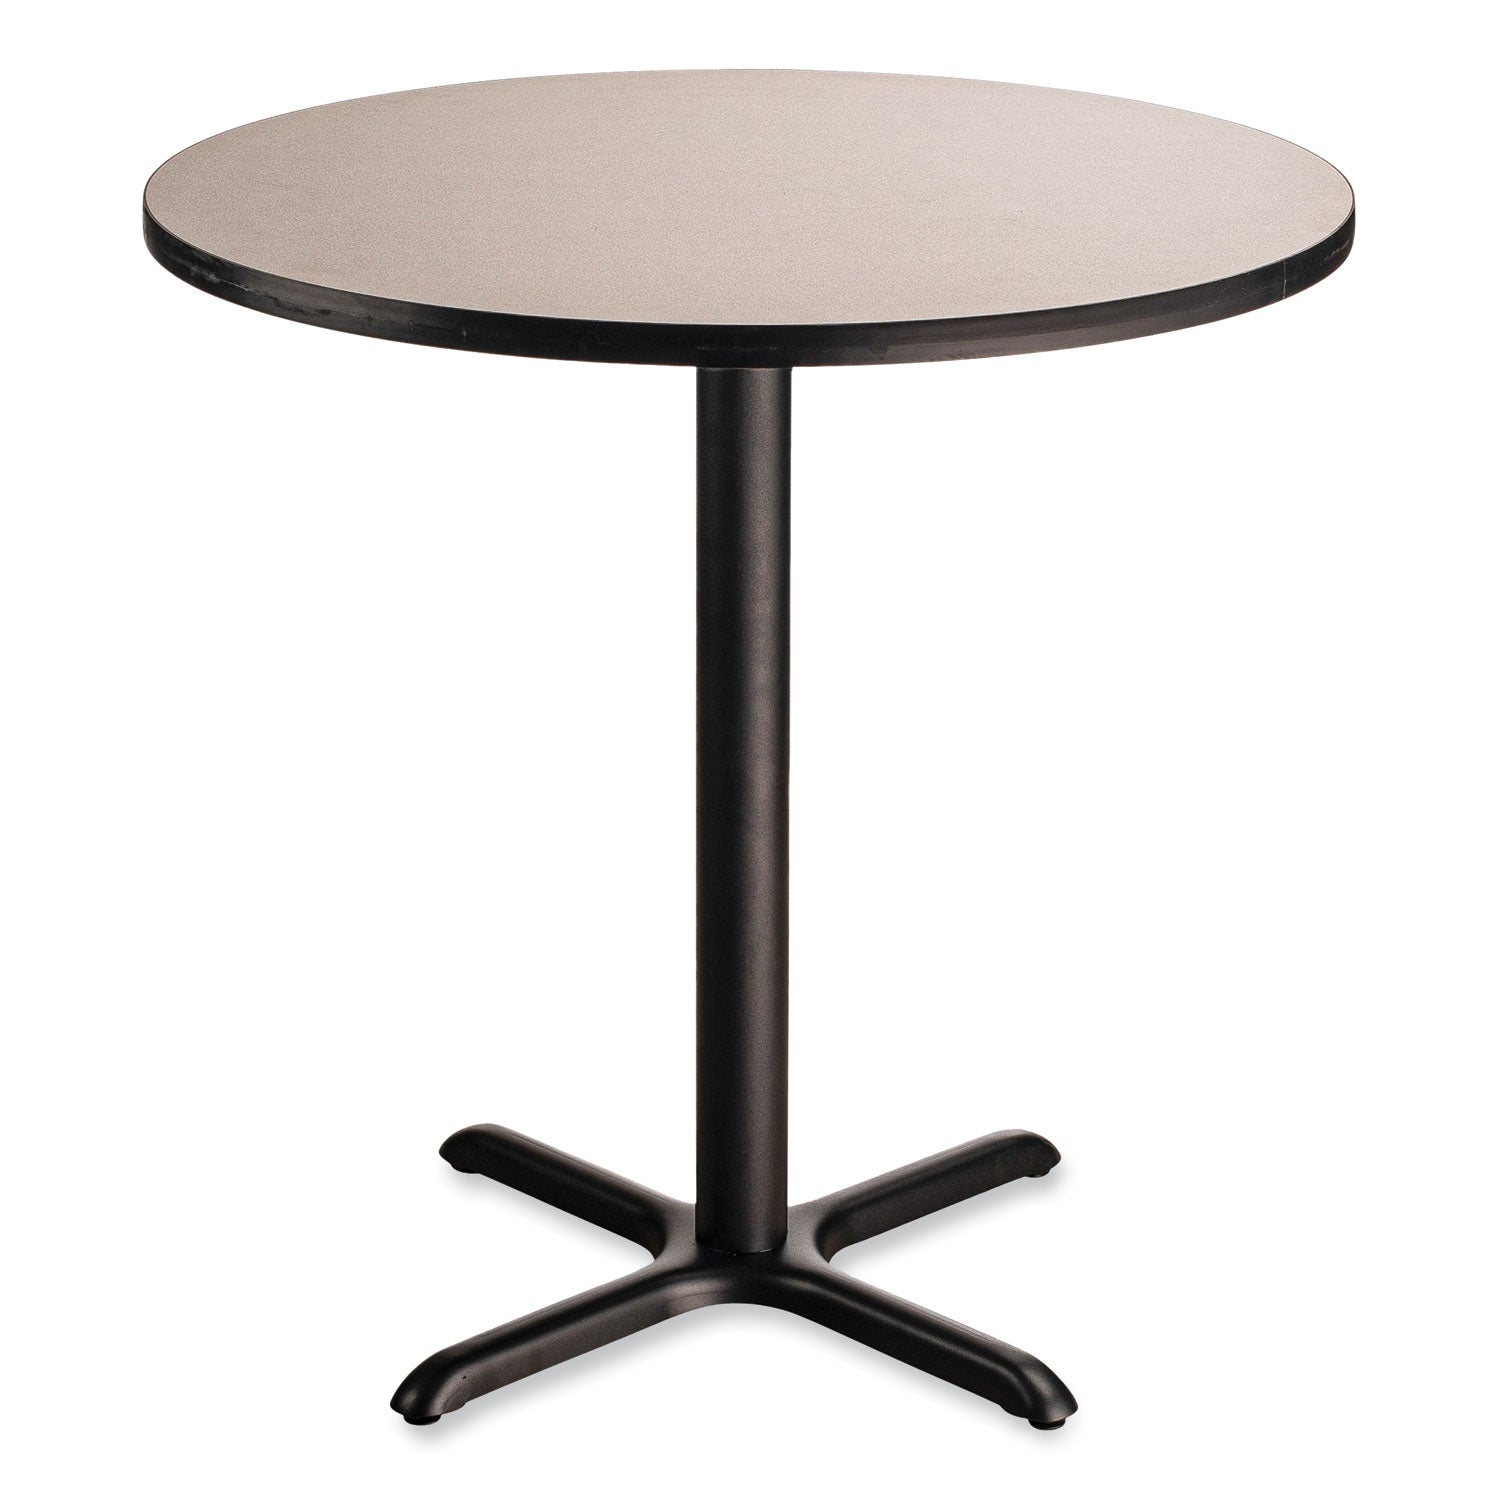 cafe-table-36-diameter-x-36h-round-top-x-base-gray-nebula-top-black-base-ships-in-7-10-business-days_npsct13636xc1gy - 1